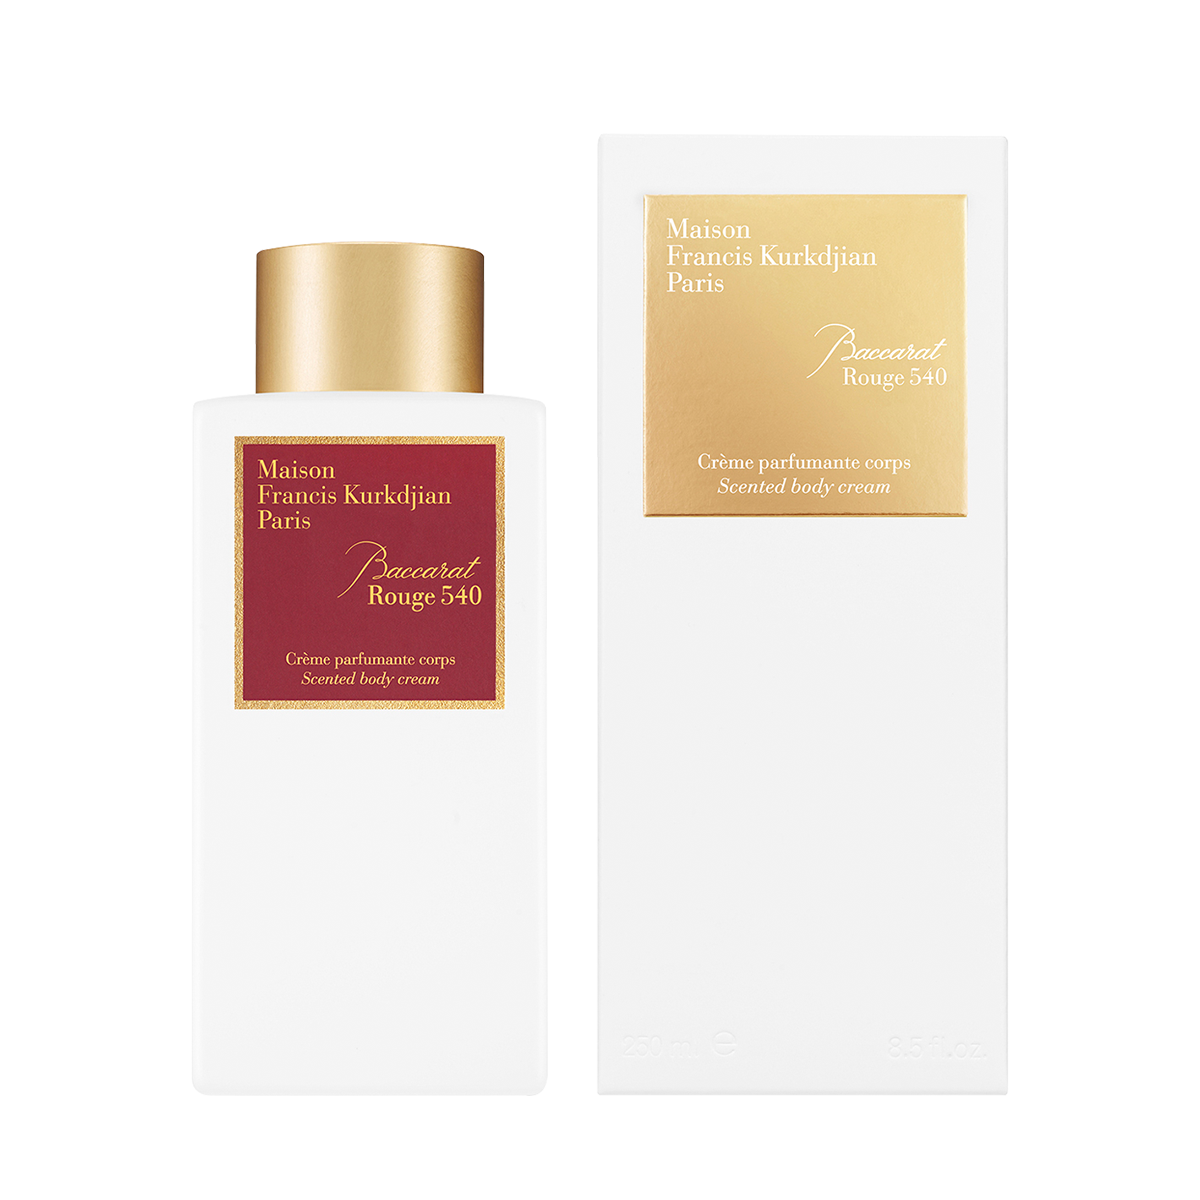 Baccarat Rouge 540 <br> Bodycreme 250ml